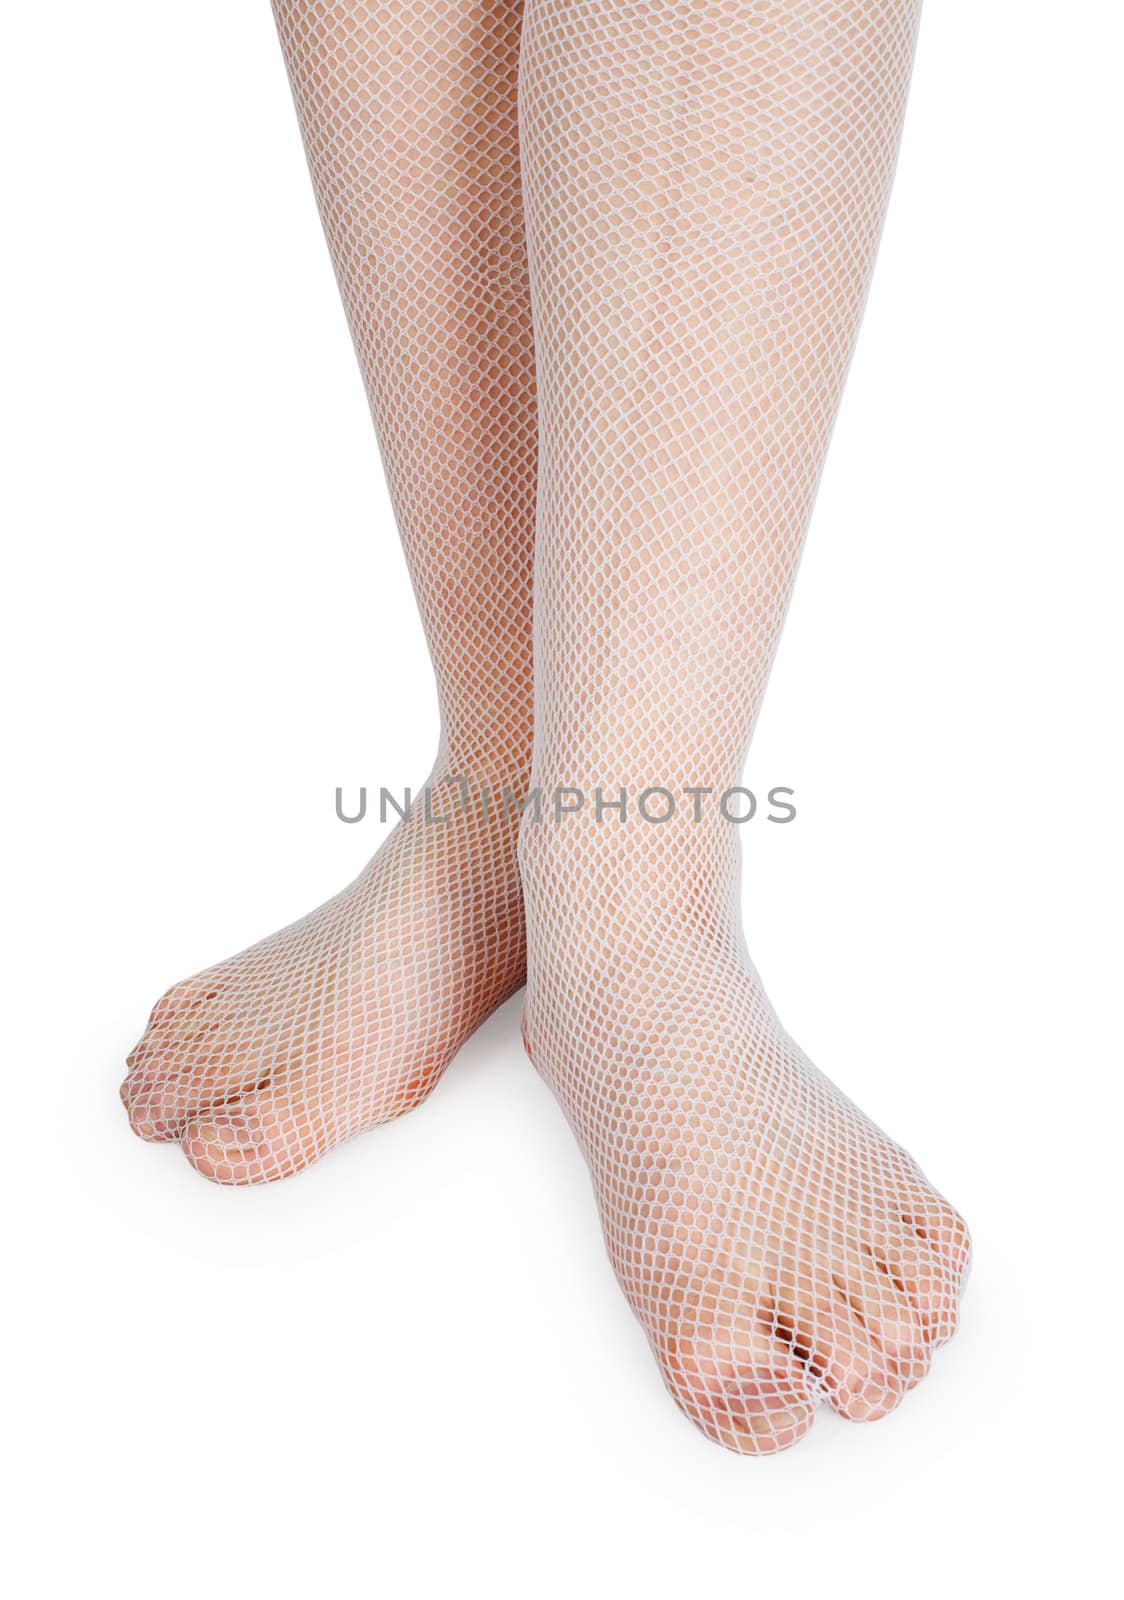 Female legs dressed in fashion stockings on white by pzaxe